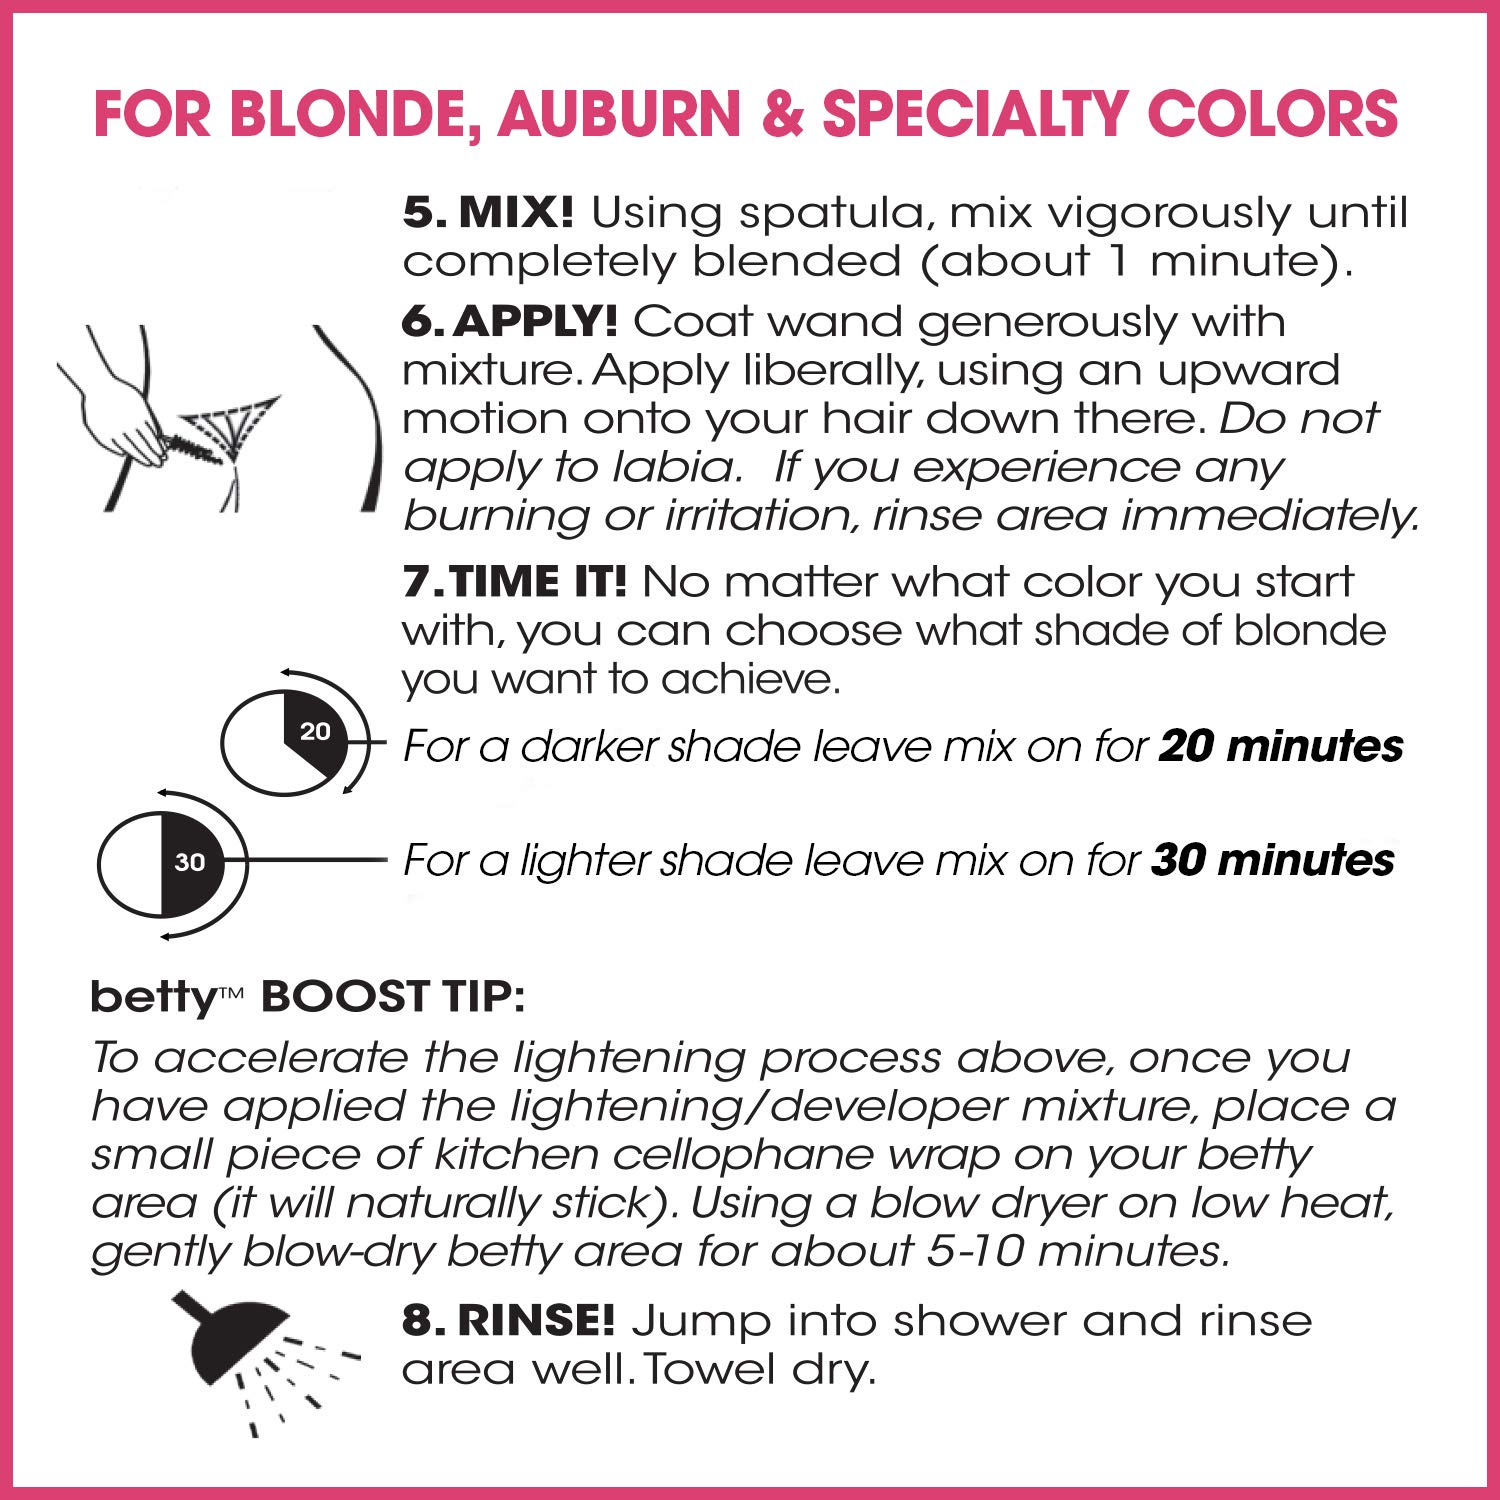 Betty Beauty Blonde Betty - Color for the Hair Down There Hair Coloring Kit